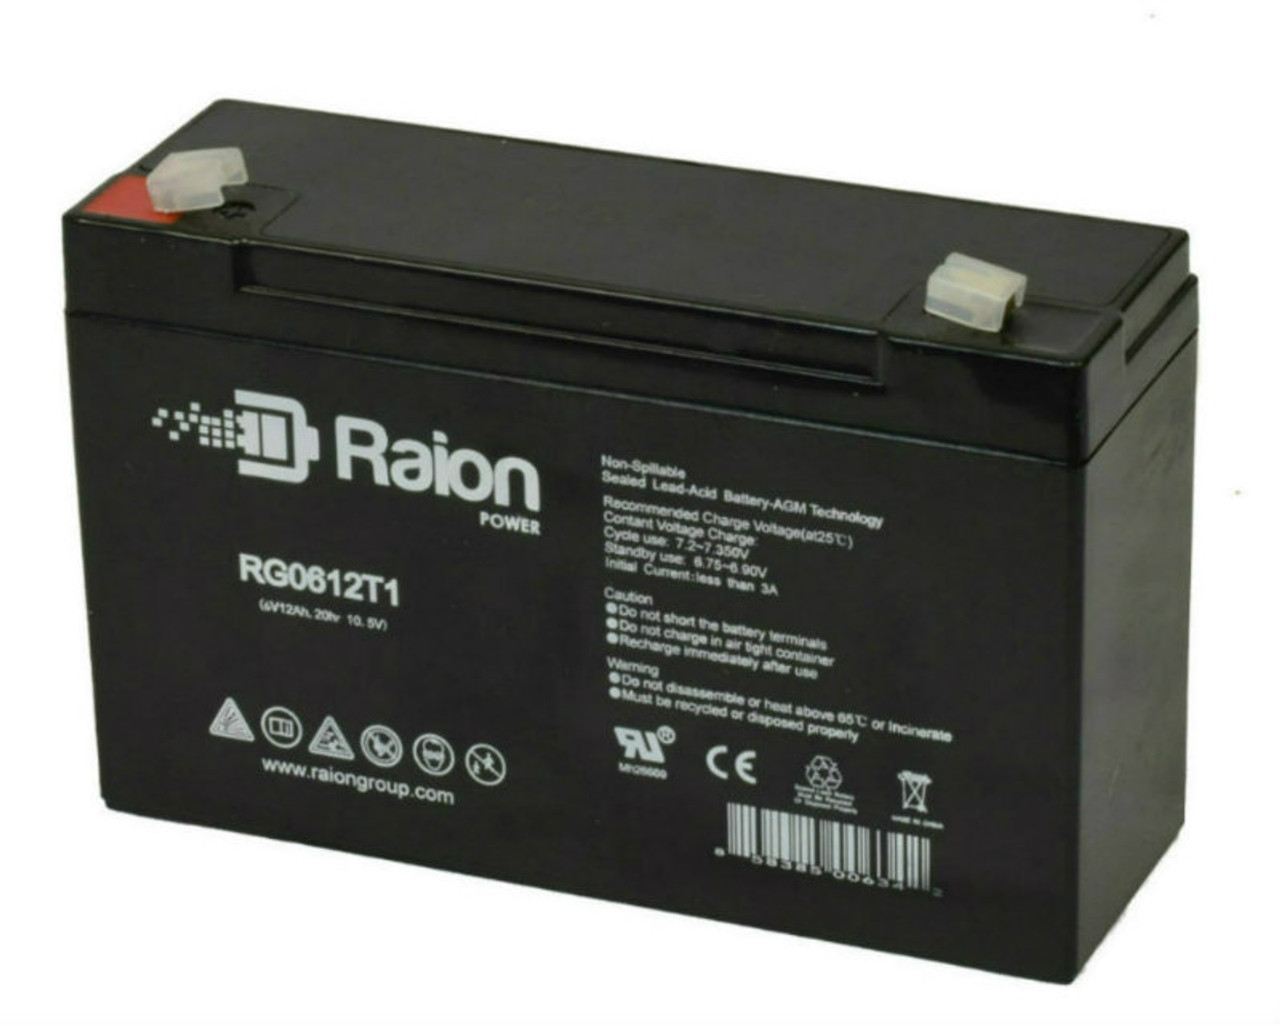 Raion Power RG06120T1 Replacement Battery for Teledyne 2ET6S88